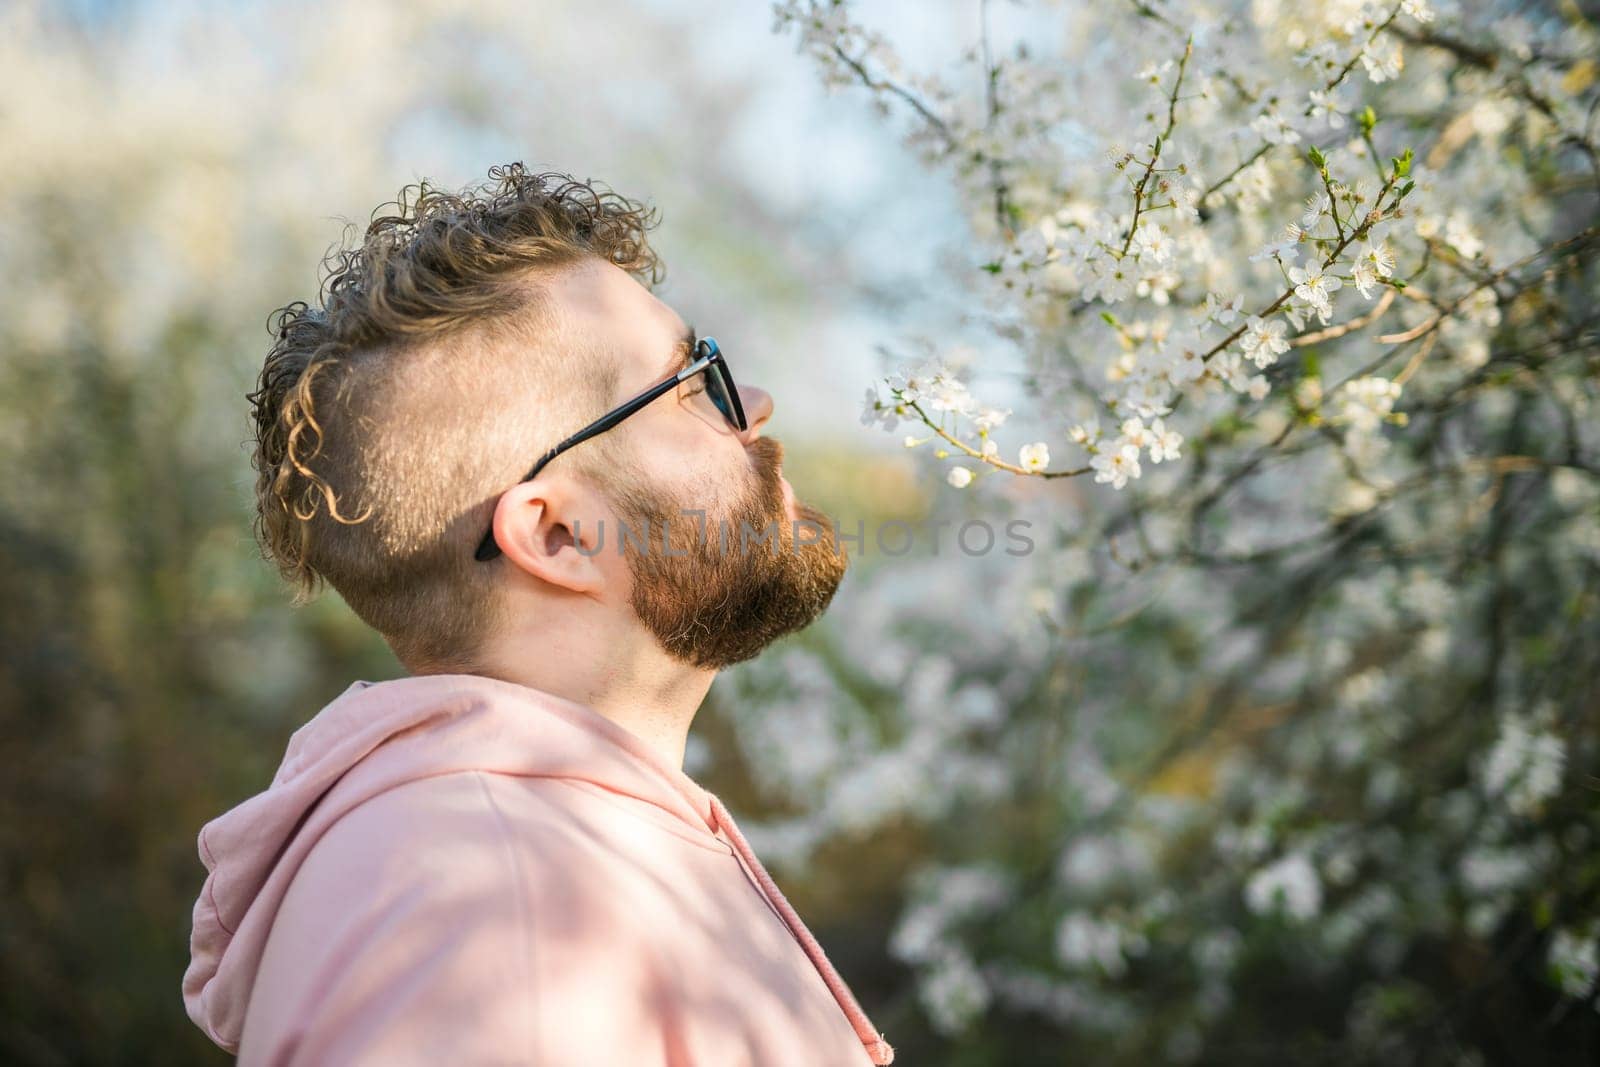 Portrait of curly millennial man inhales the fragrance of spring flowers of blooming jasmine or cherry tree. Spring time